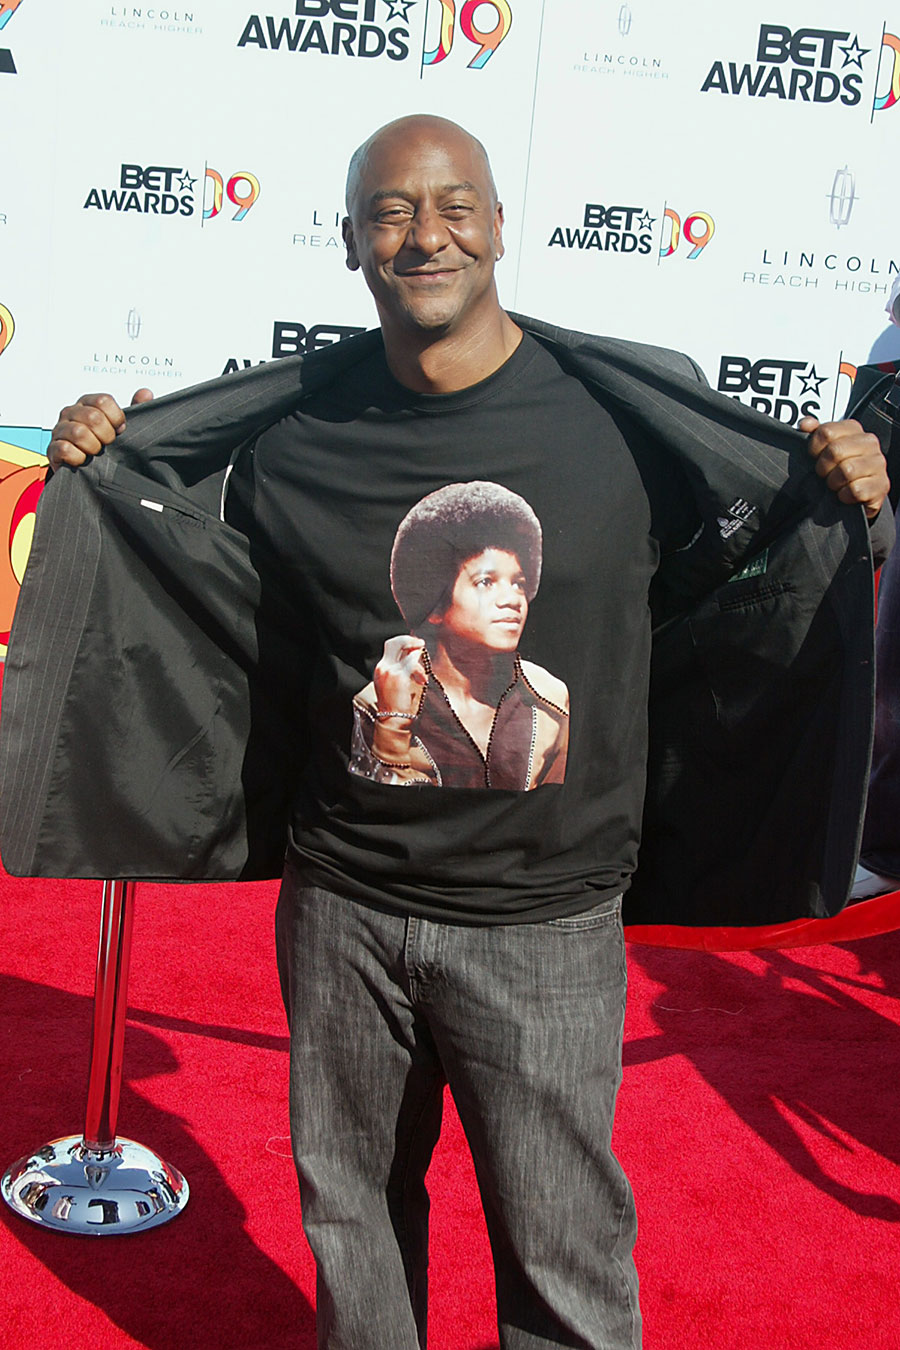 Stephen Hill honouring Jackson at the 2009 BET Awards